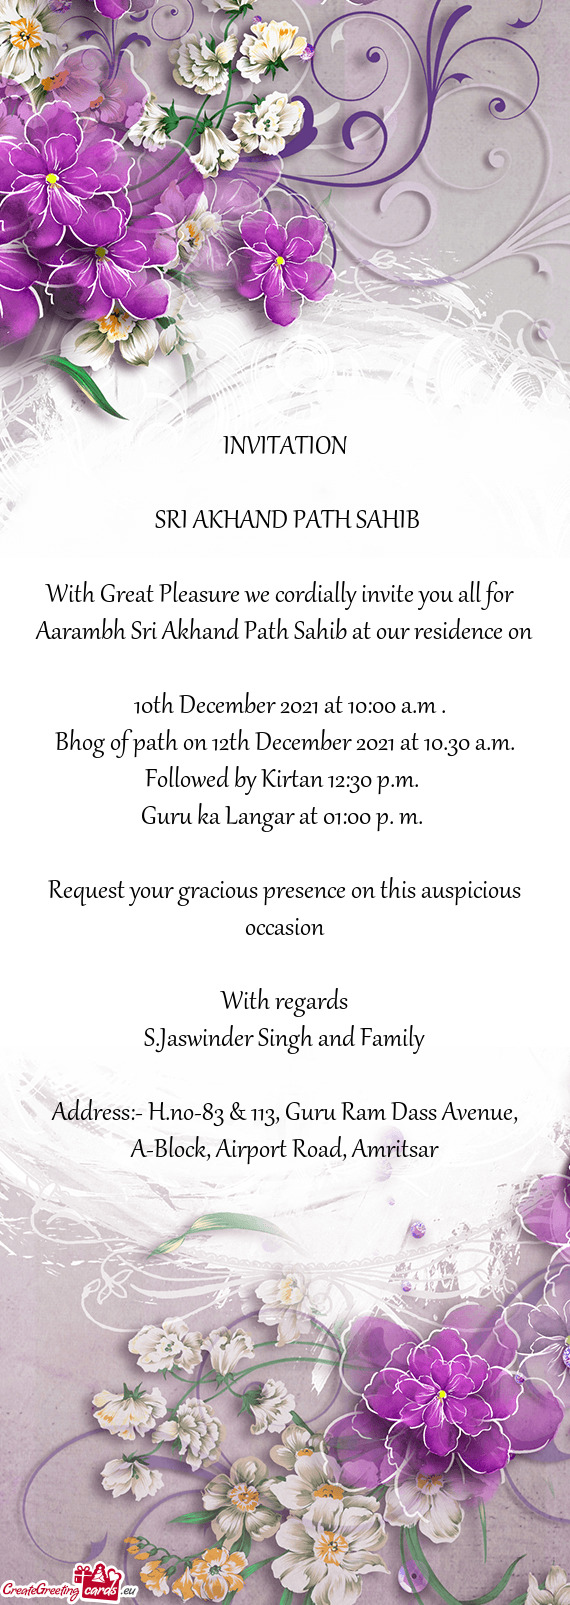 Aarambh Sri Akhand Path Sahib at our residence on 10th December 2021 at 10:00 a.m